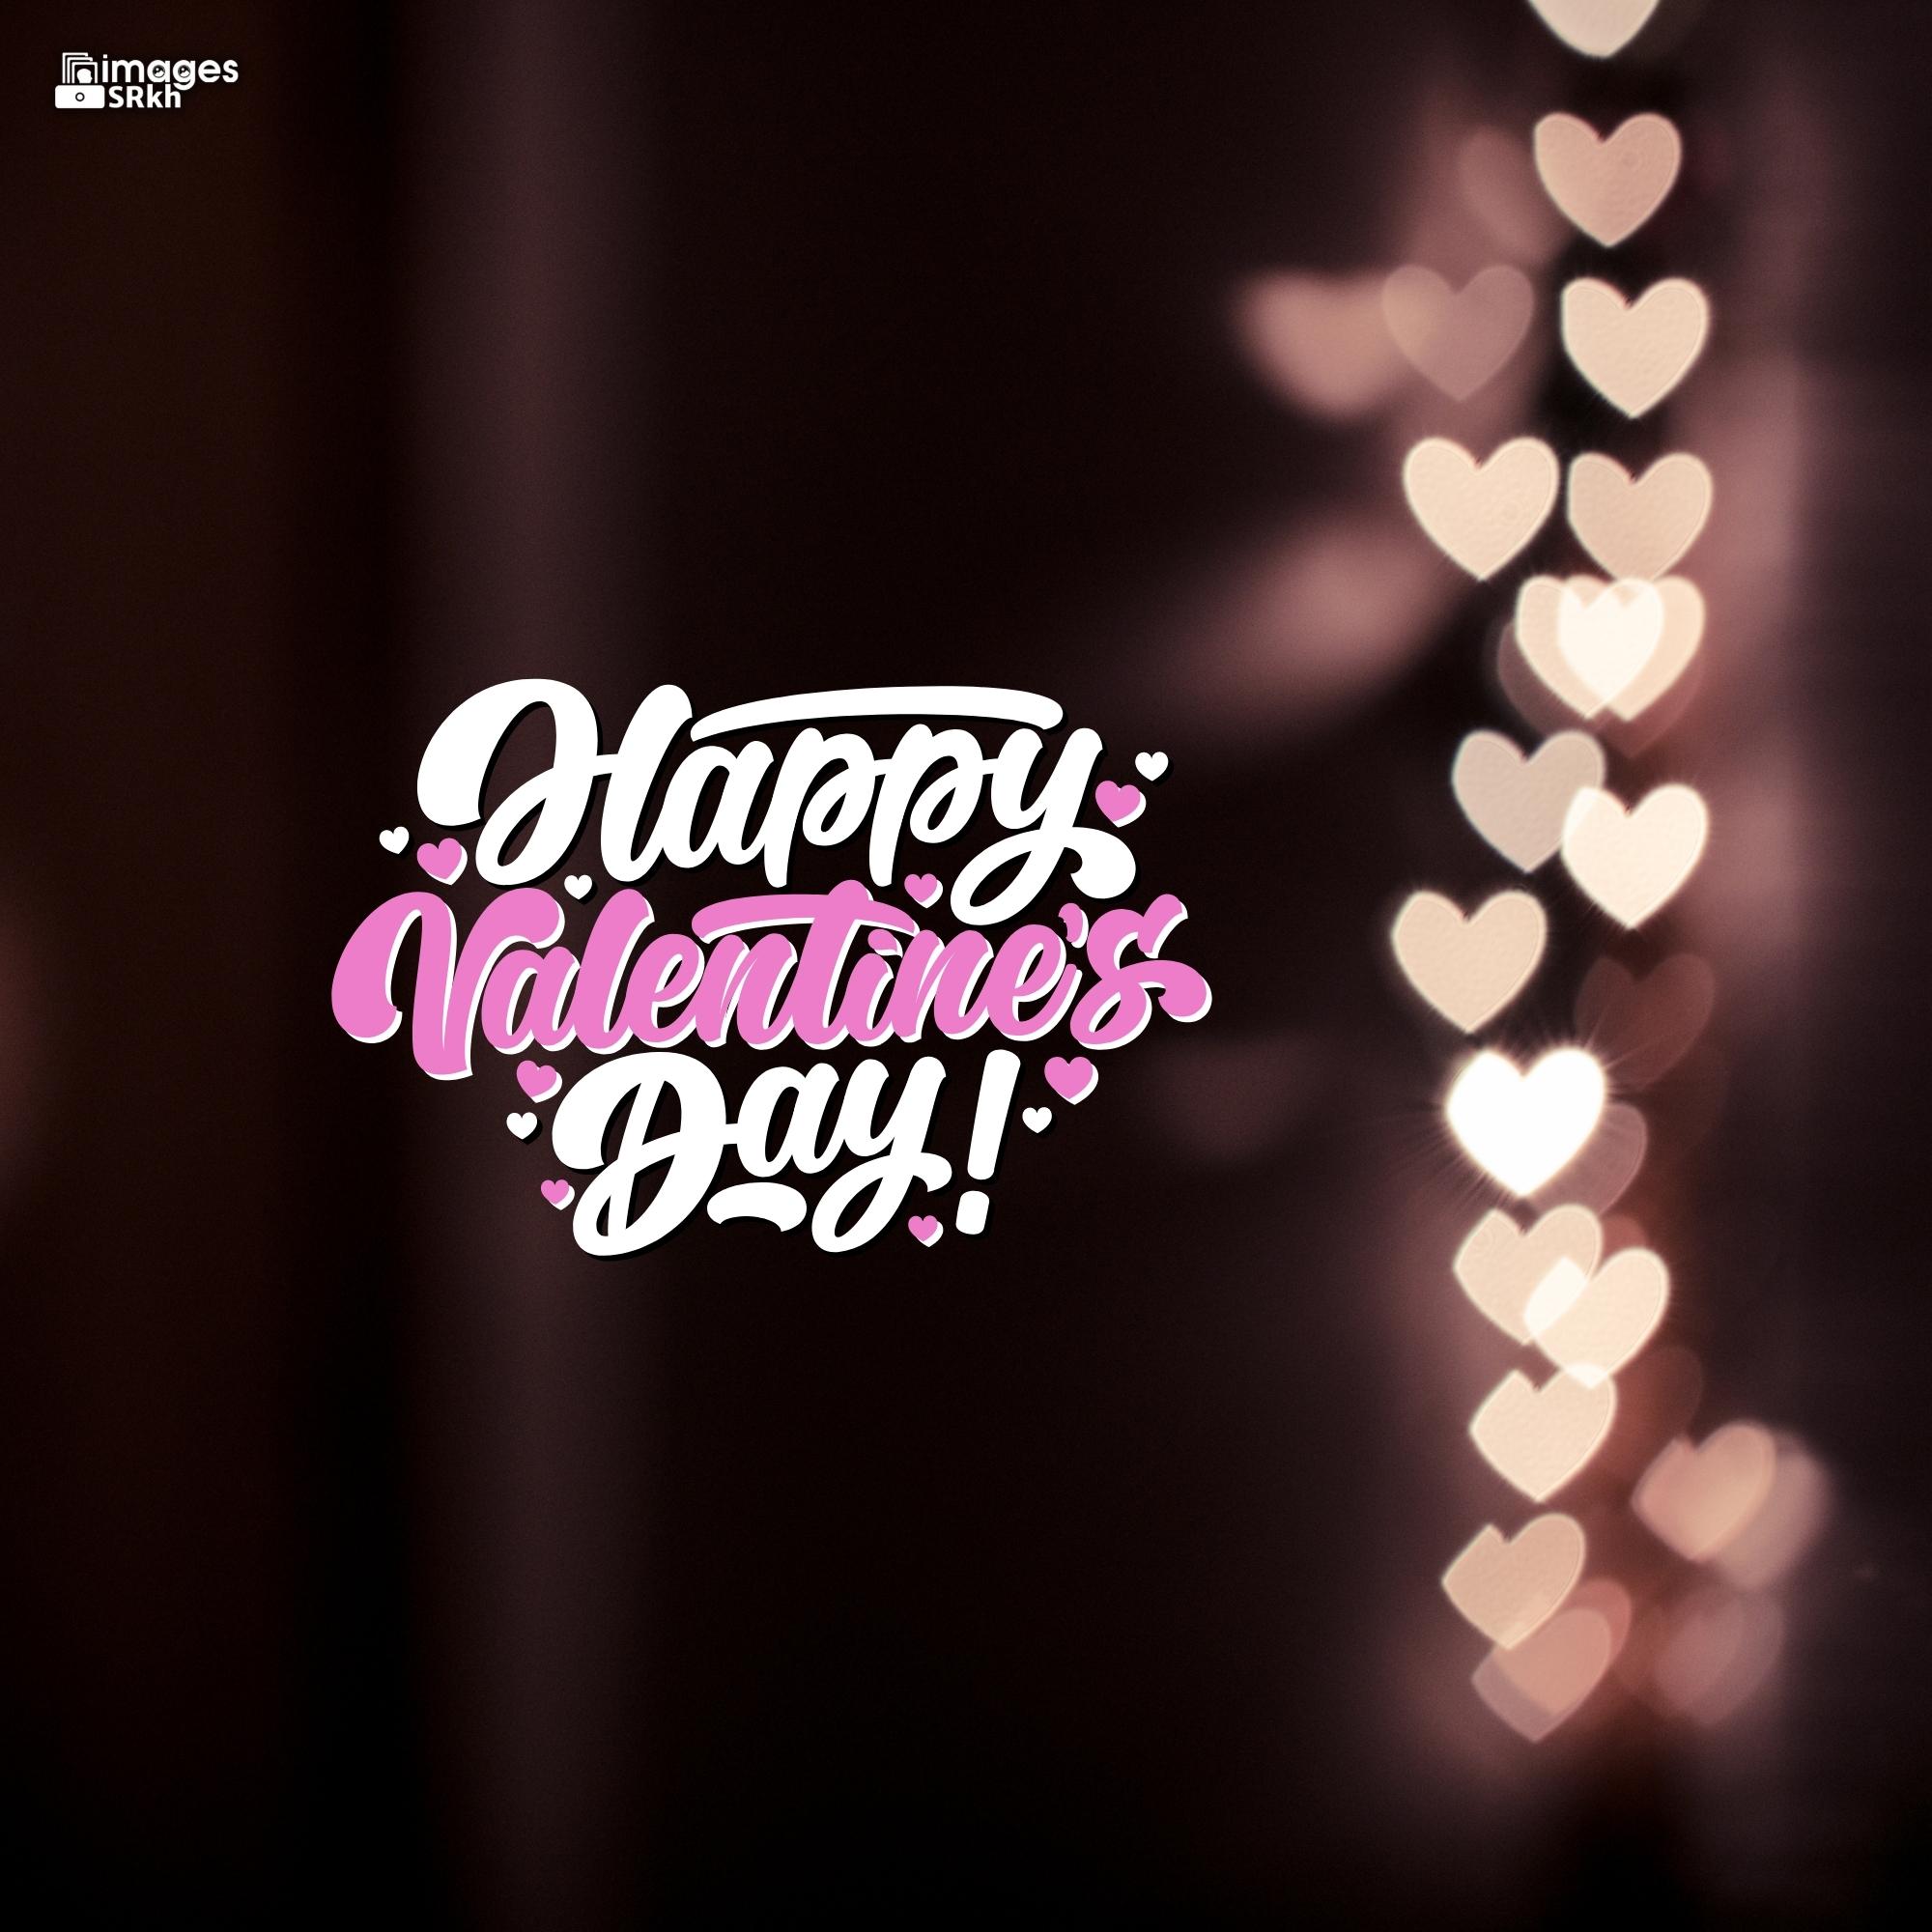 Happy Valentines Day | 488 | PREMIUM IMAGES | Wishes for Love